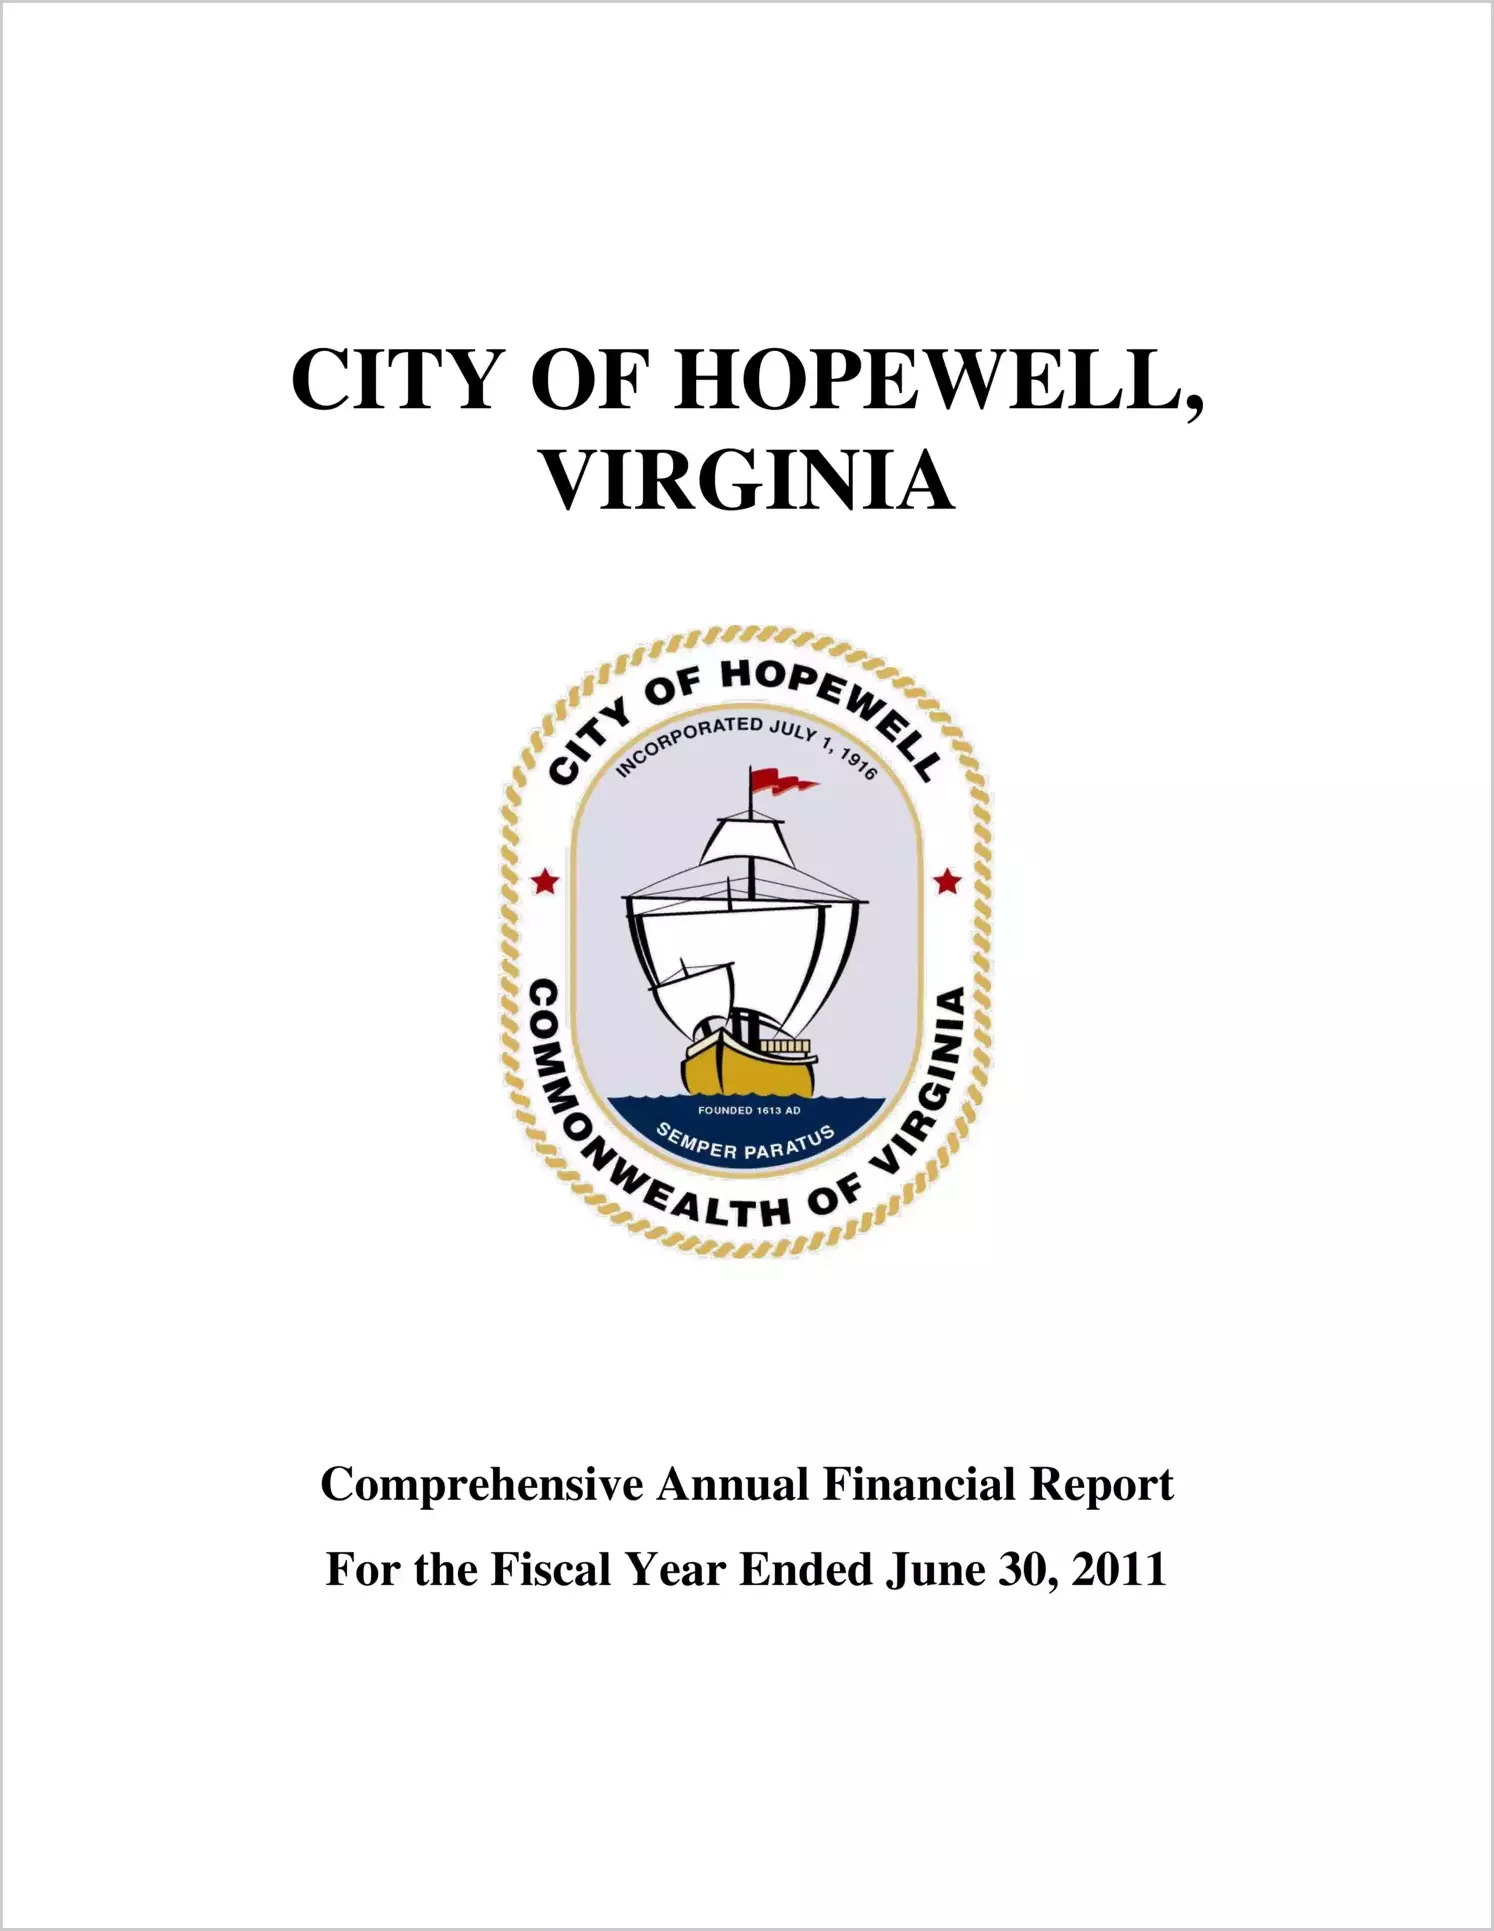 2011 Annual Financial Report for City of Hopewell